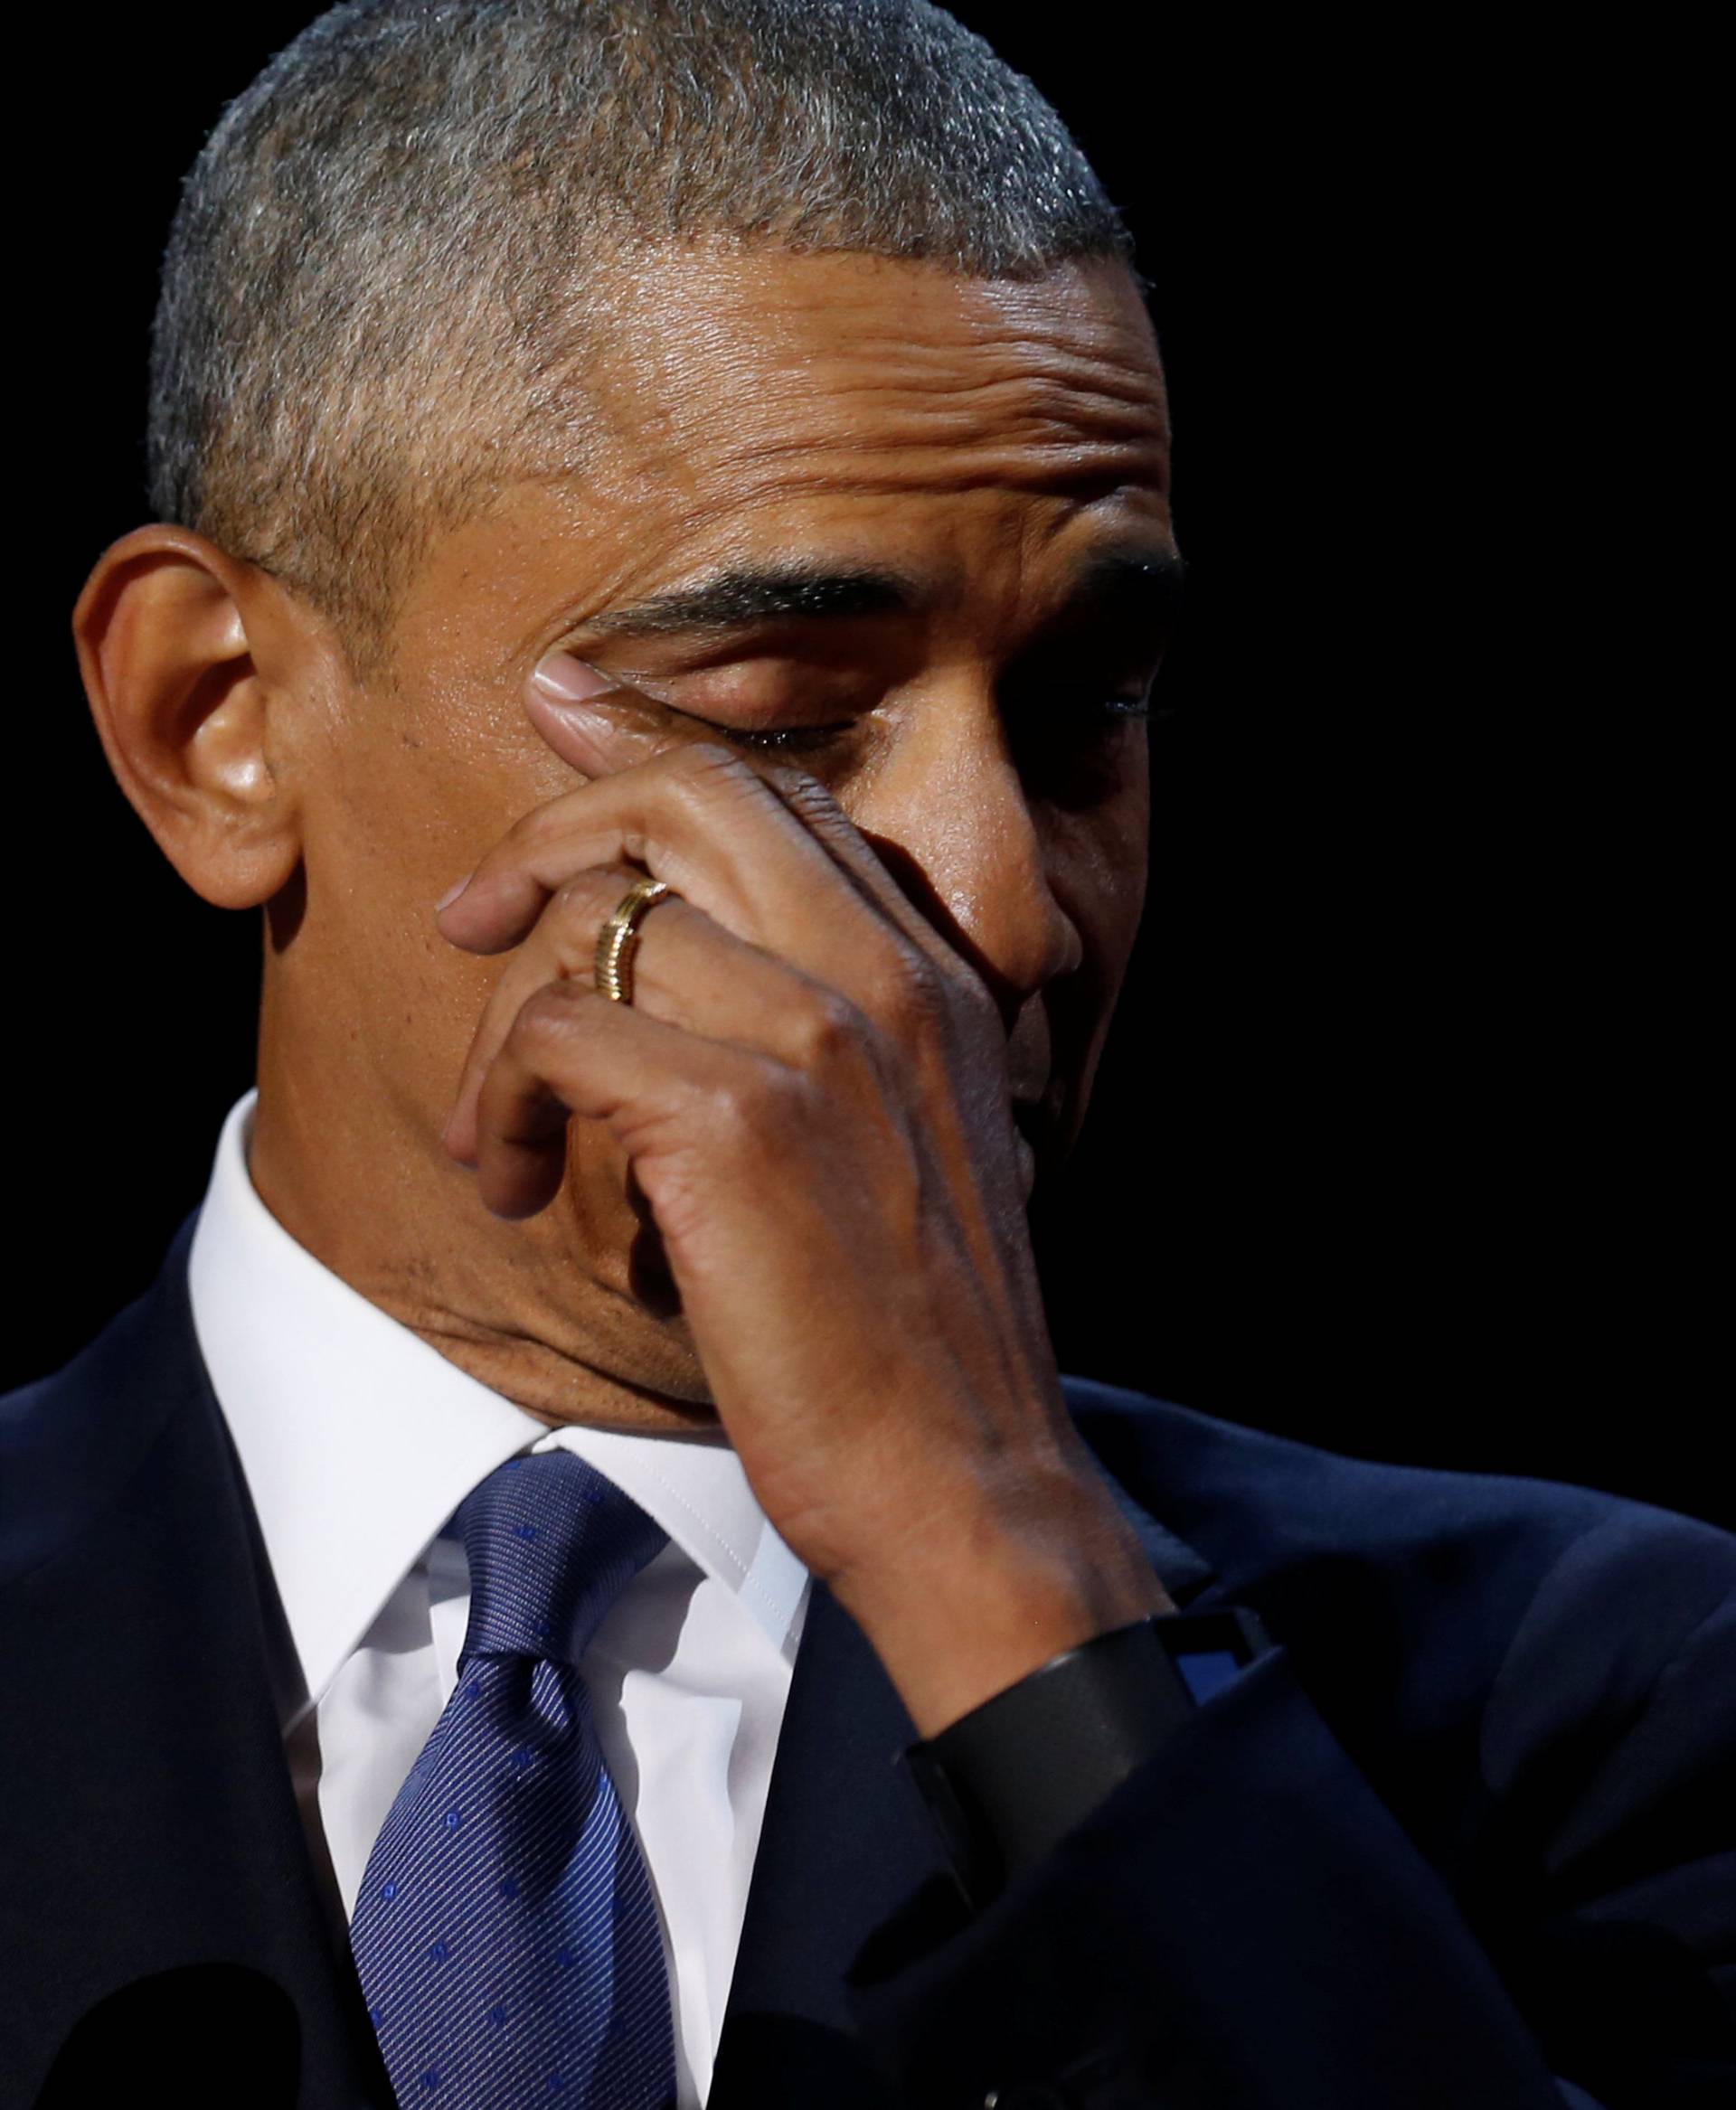 Obama wipes away tears as he delivers his farewell address in Chicago